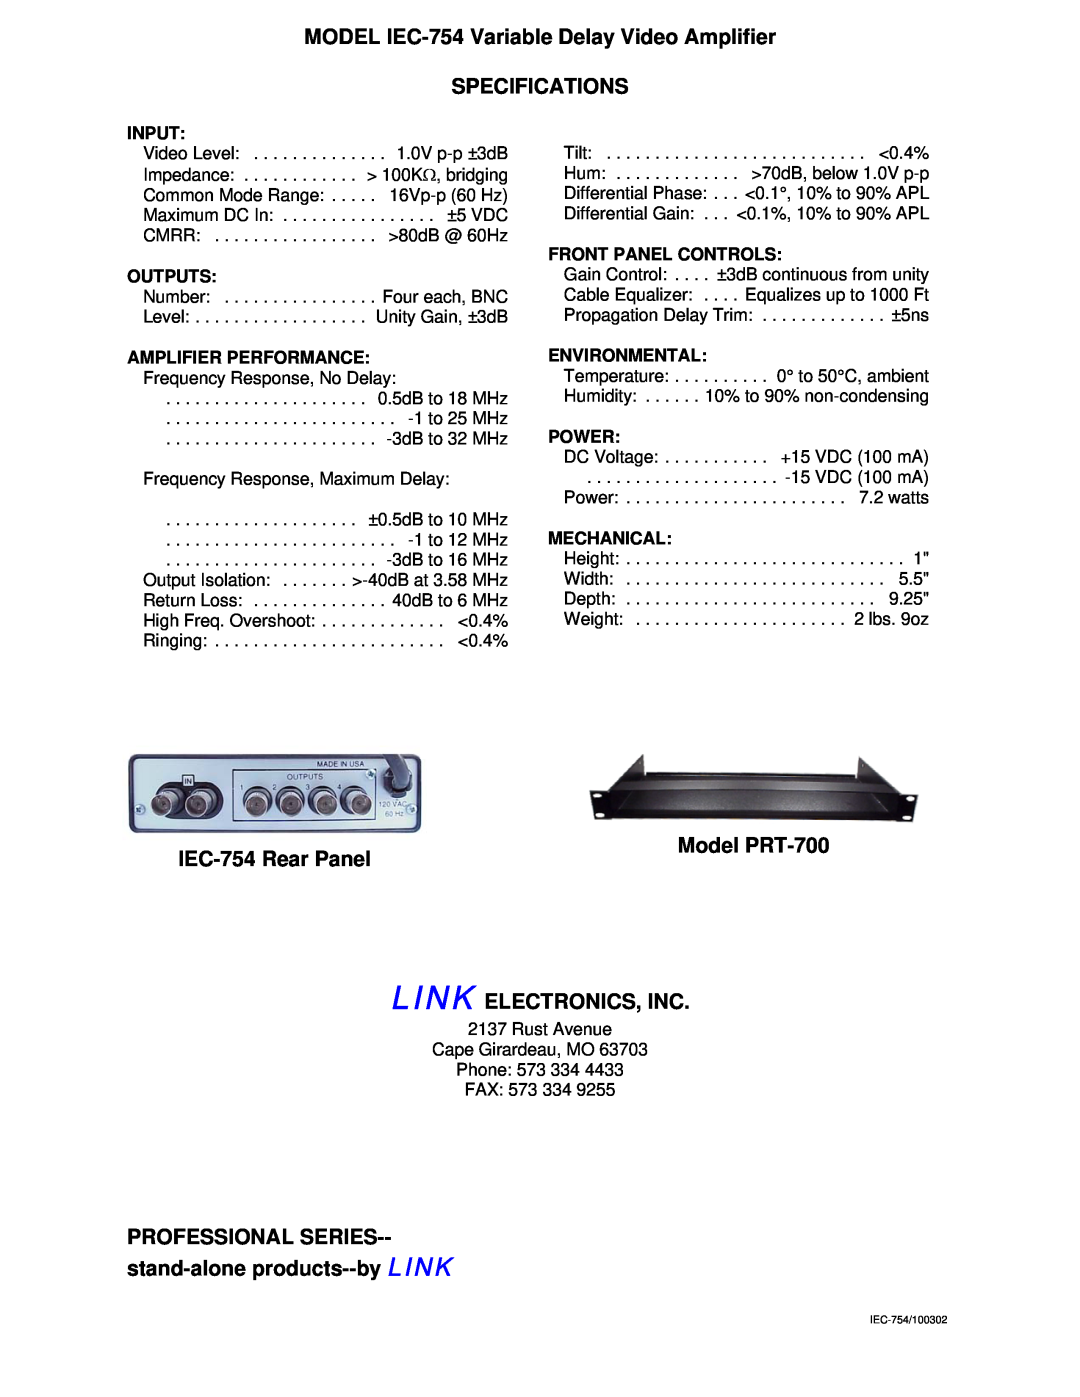 Link electronic IEC-754 Input, Outputs, AMPLIFIER PERFORMANCE Frequency Response, No Delay, Front Panel Controls, Power 